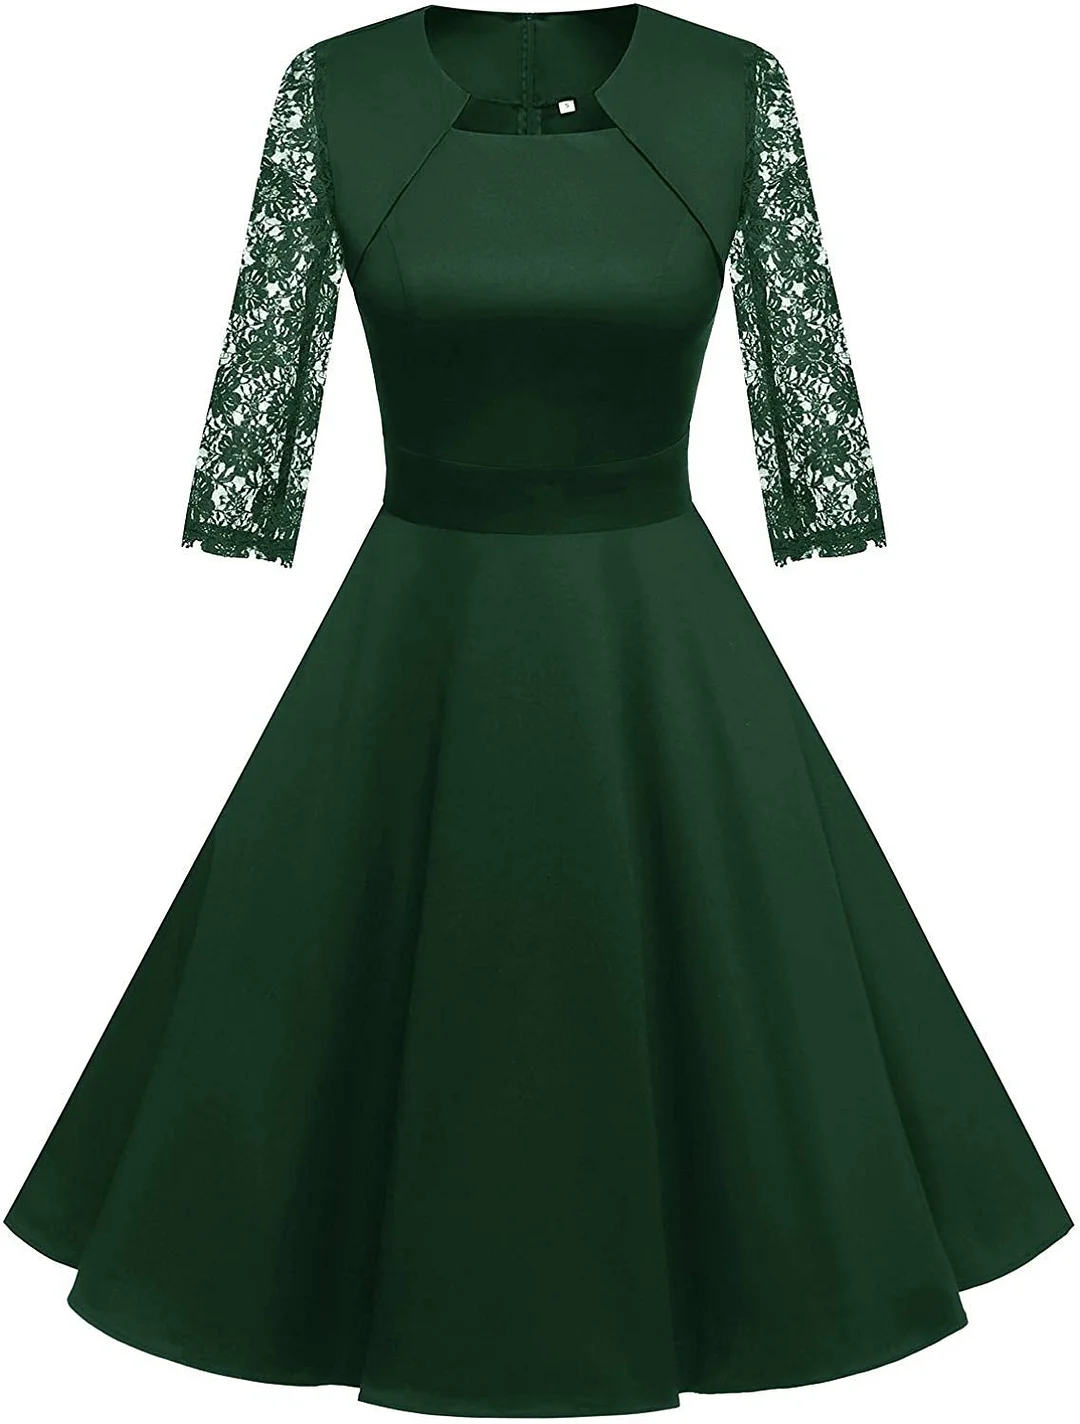 Retro Vintage A-Line Cap Sleeve Cocktail Swing Party Dress for women